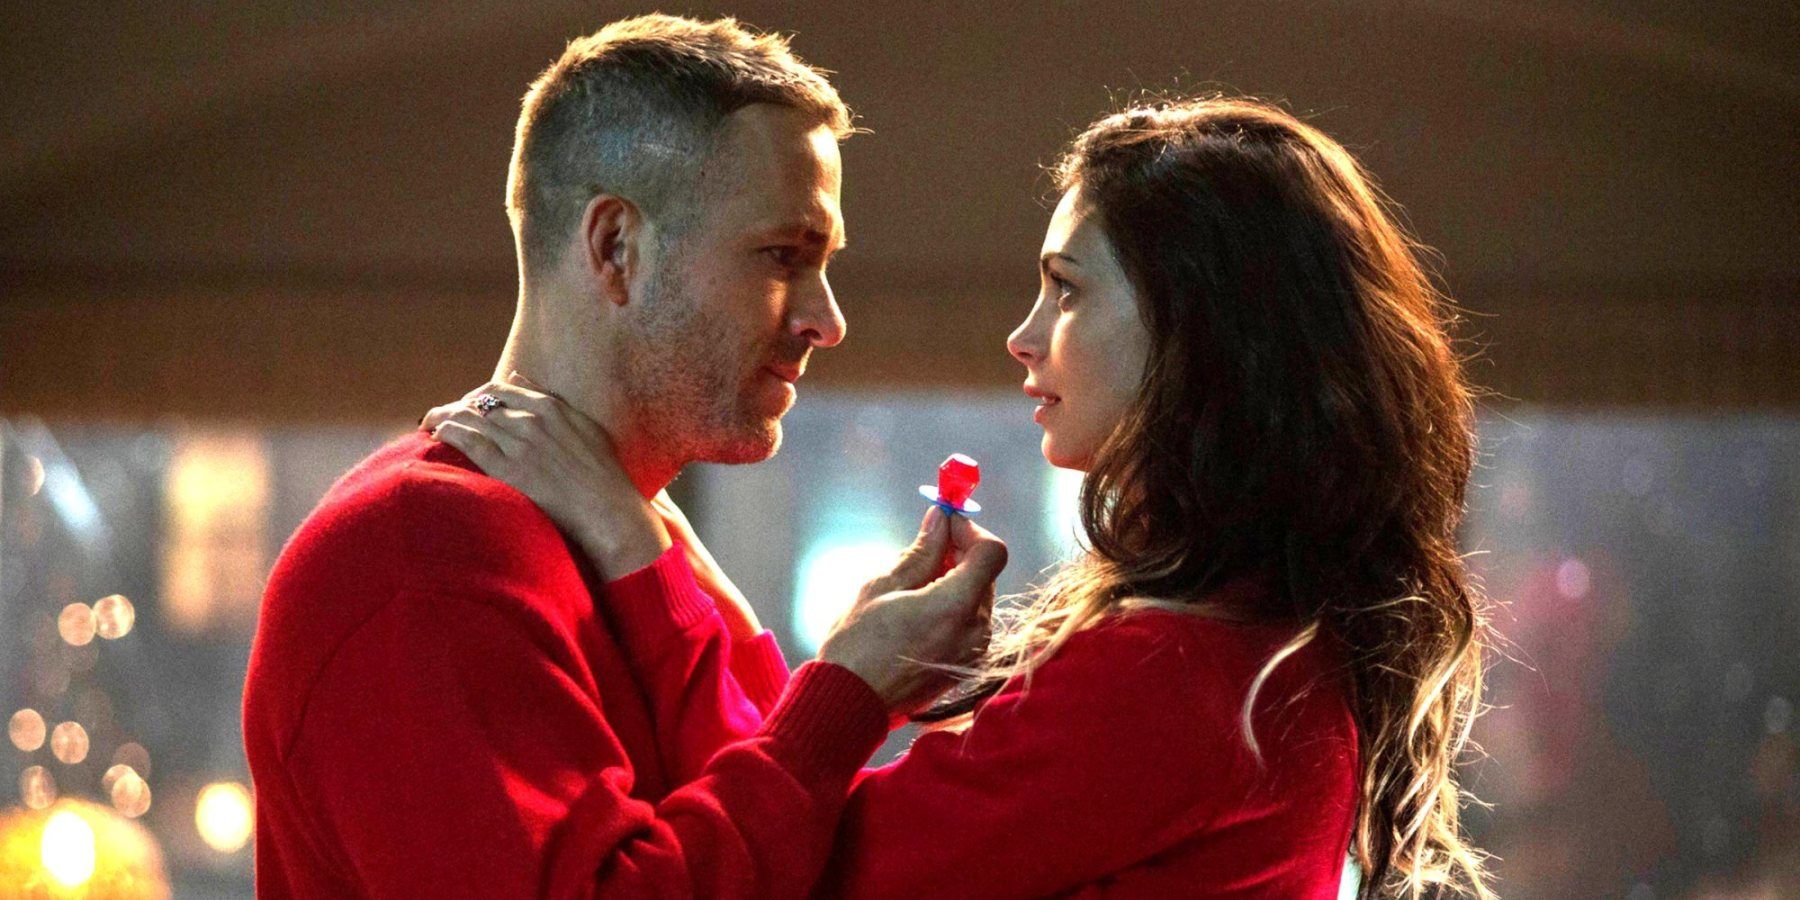 Morena Baccarin Fucking - Deadpool's Baccarin Agrees with Decision to Cut Extra Sex Scenes